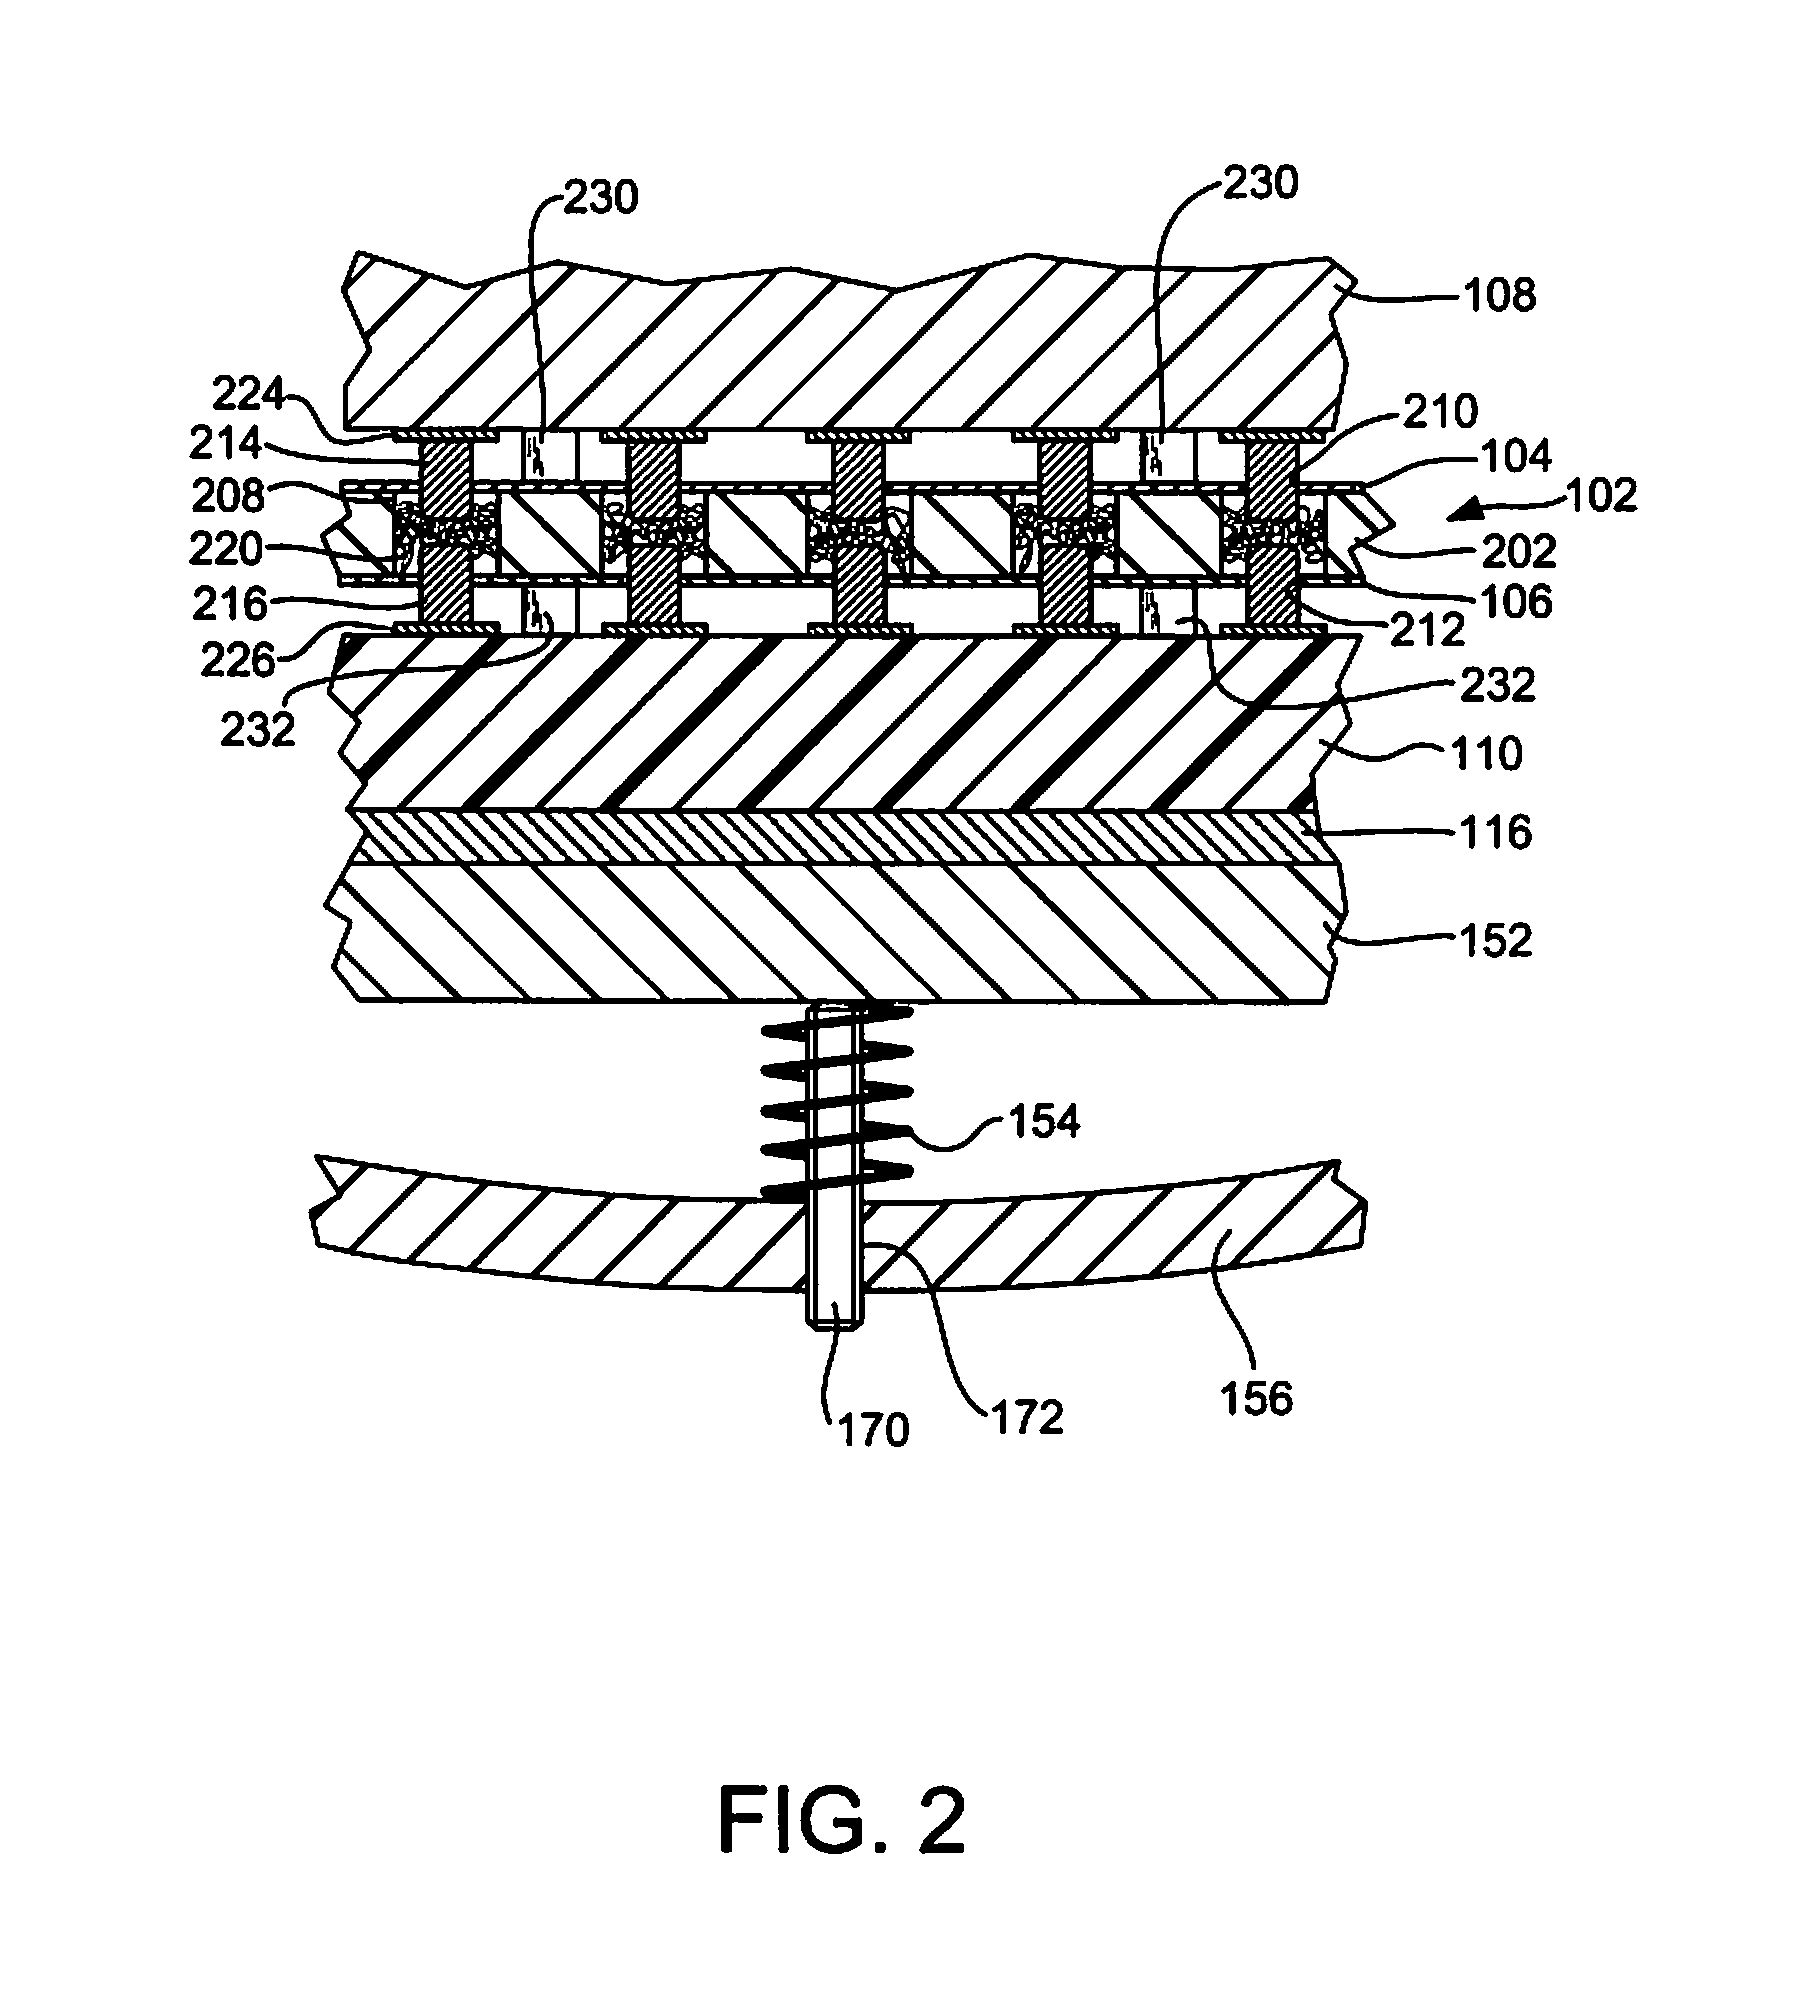 Method and Apparatus for Electrically Connecting Two Substrates Using a Resilient Wire Bundle Captured in an Aperture of an Interposer by a Retention Member